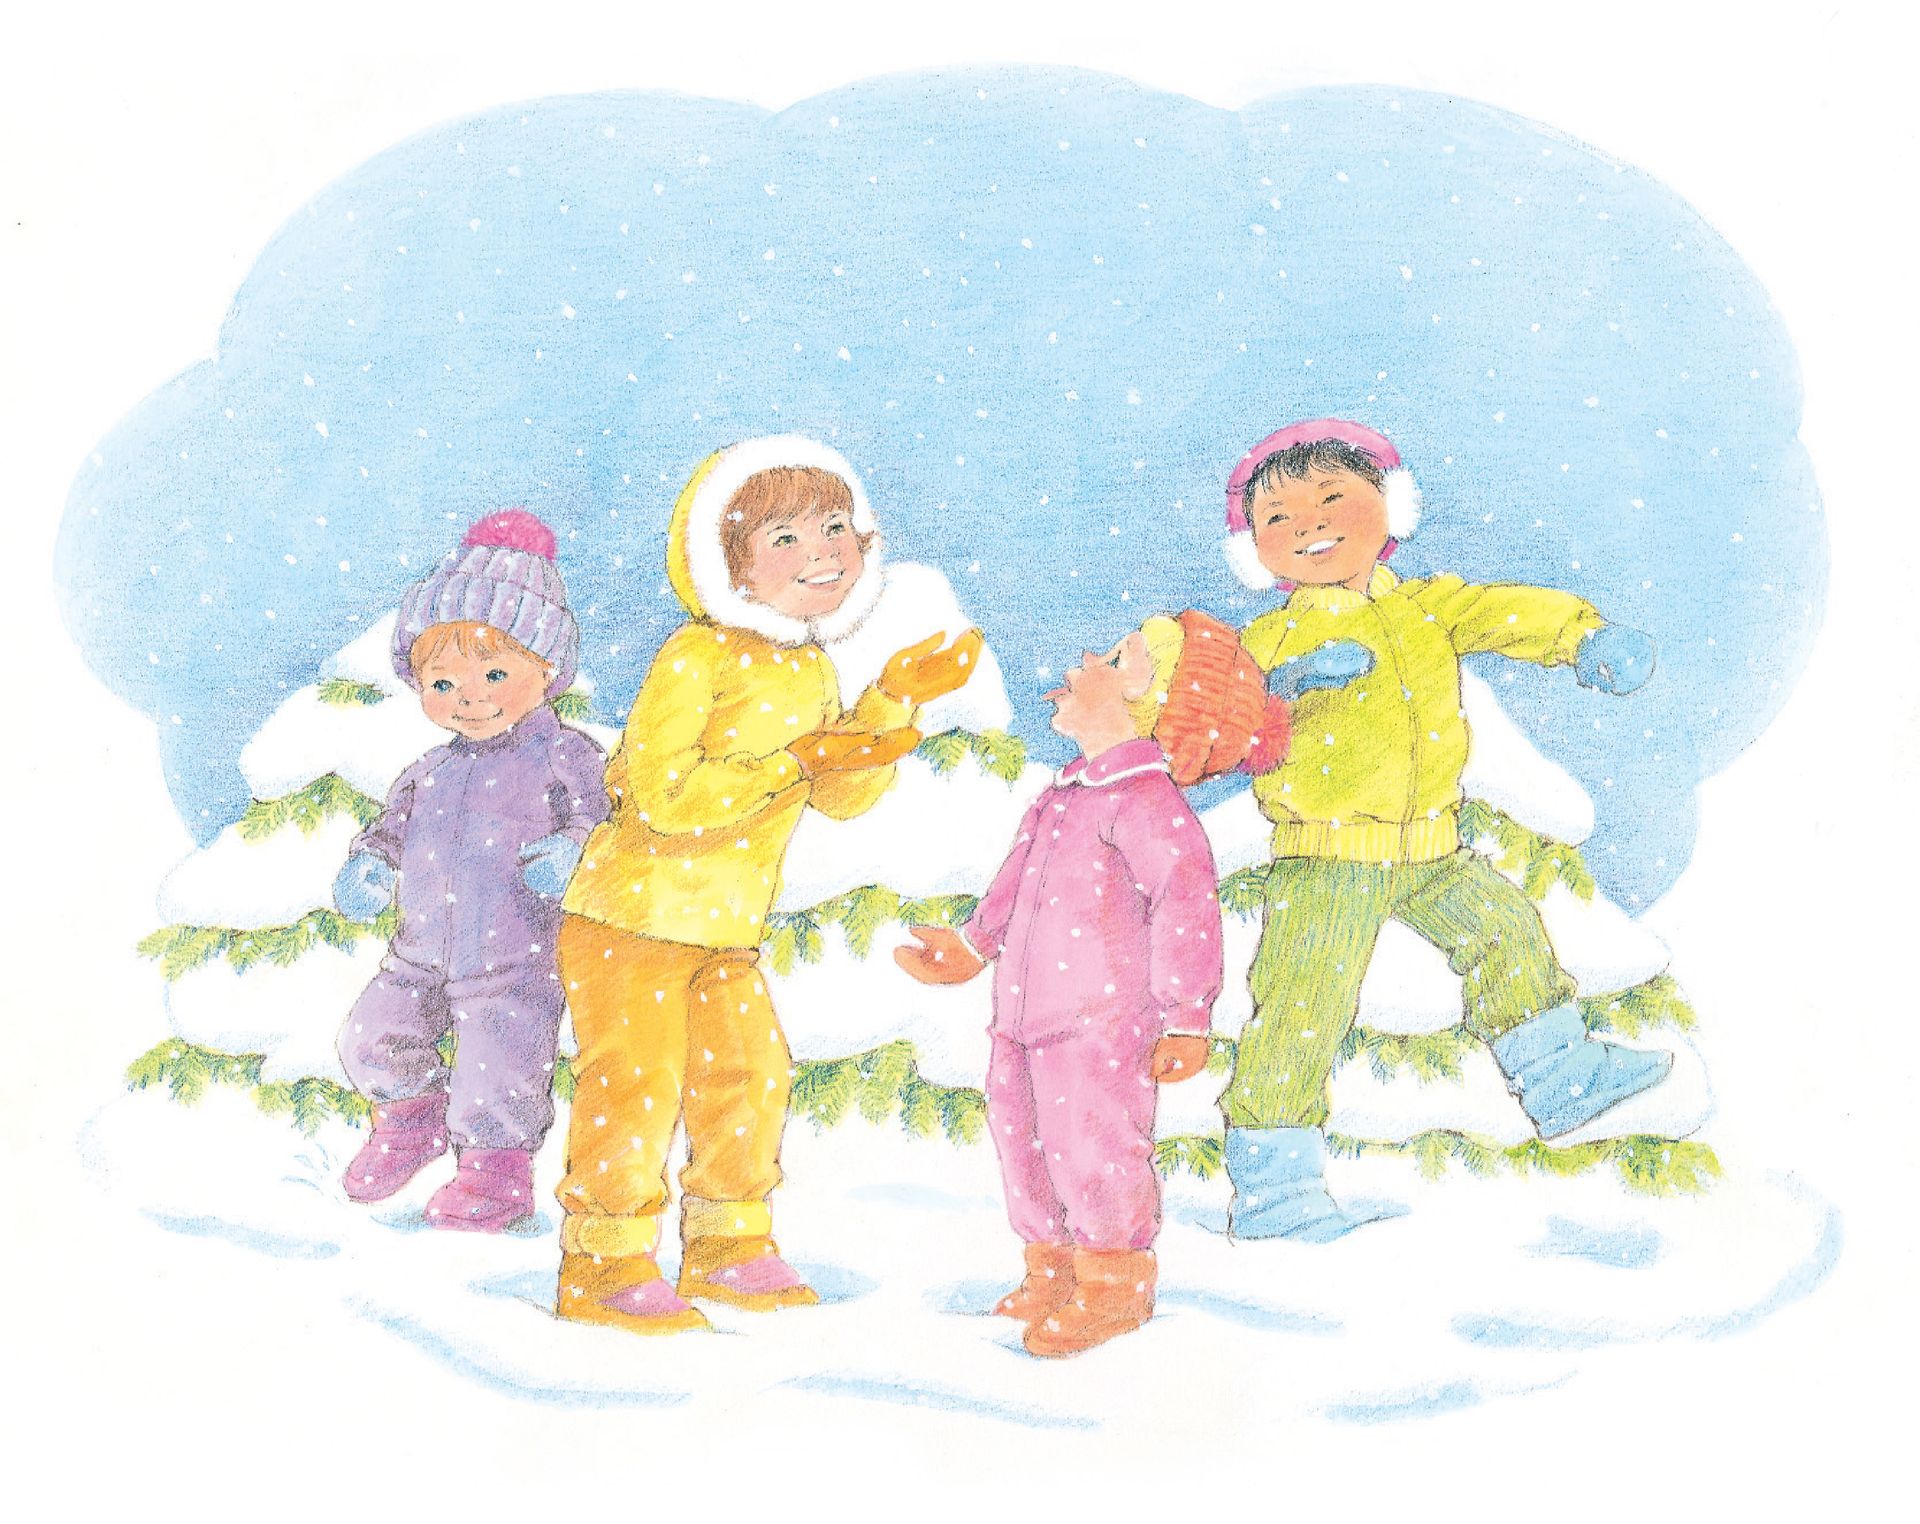 Four children in snow gear sticking out their tongues to catch snowflakes. From the Children’s Songbook, page 248, “Falling Snow”; watercolor illustration by Virginia Sargent.